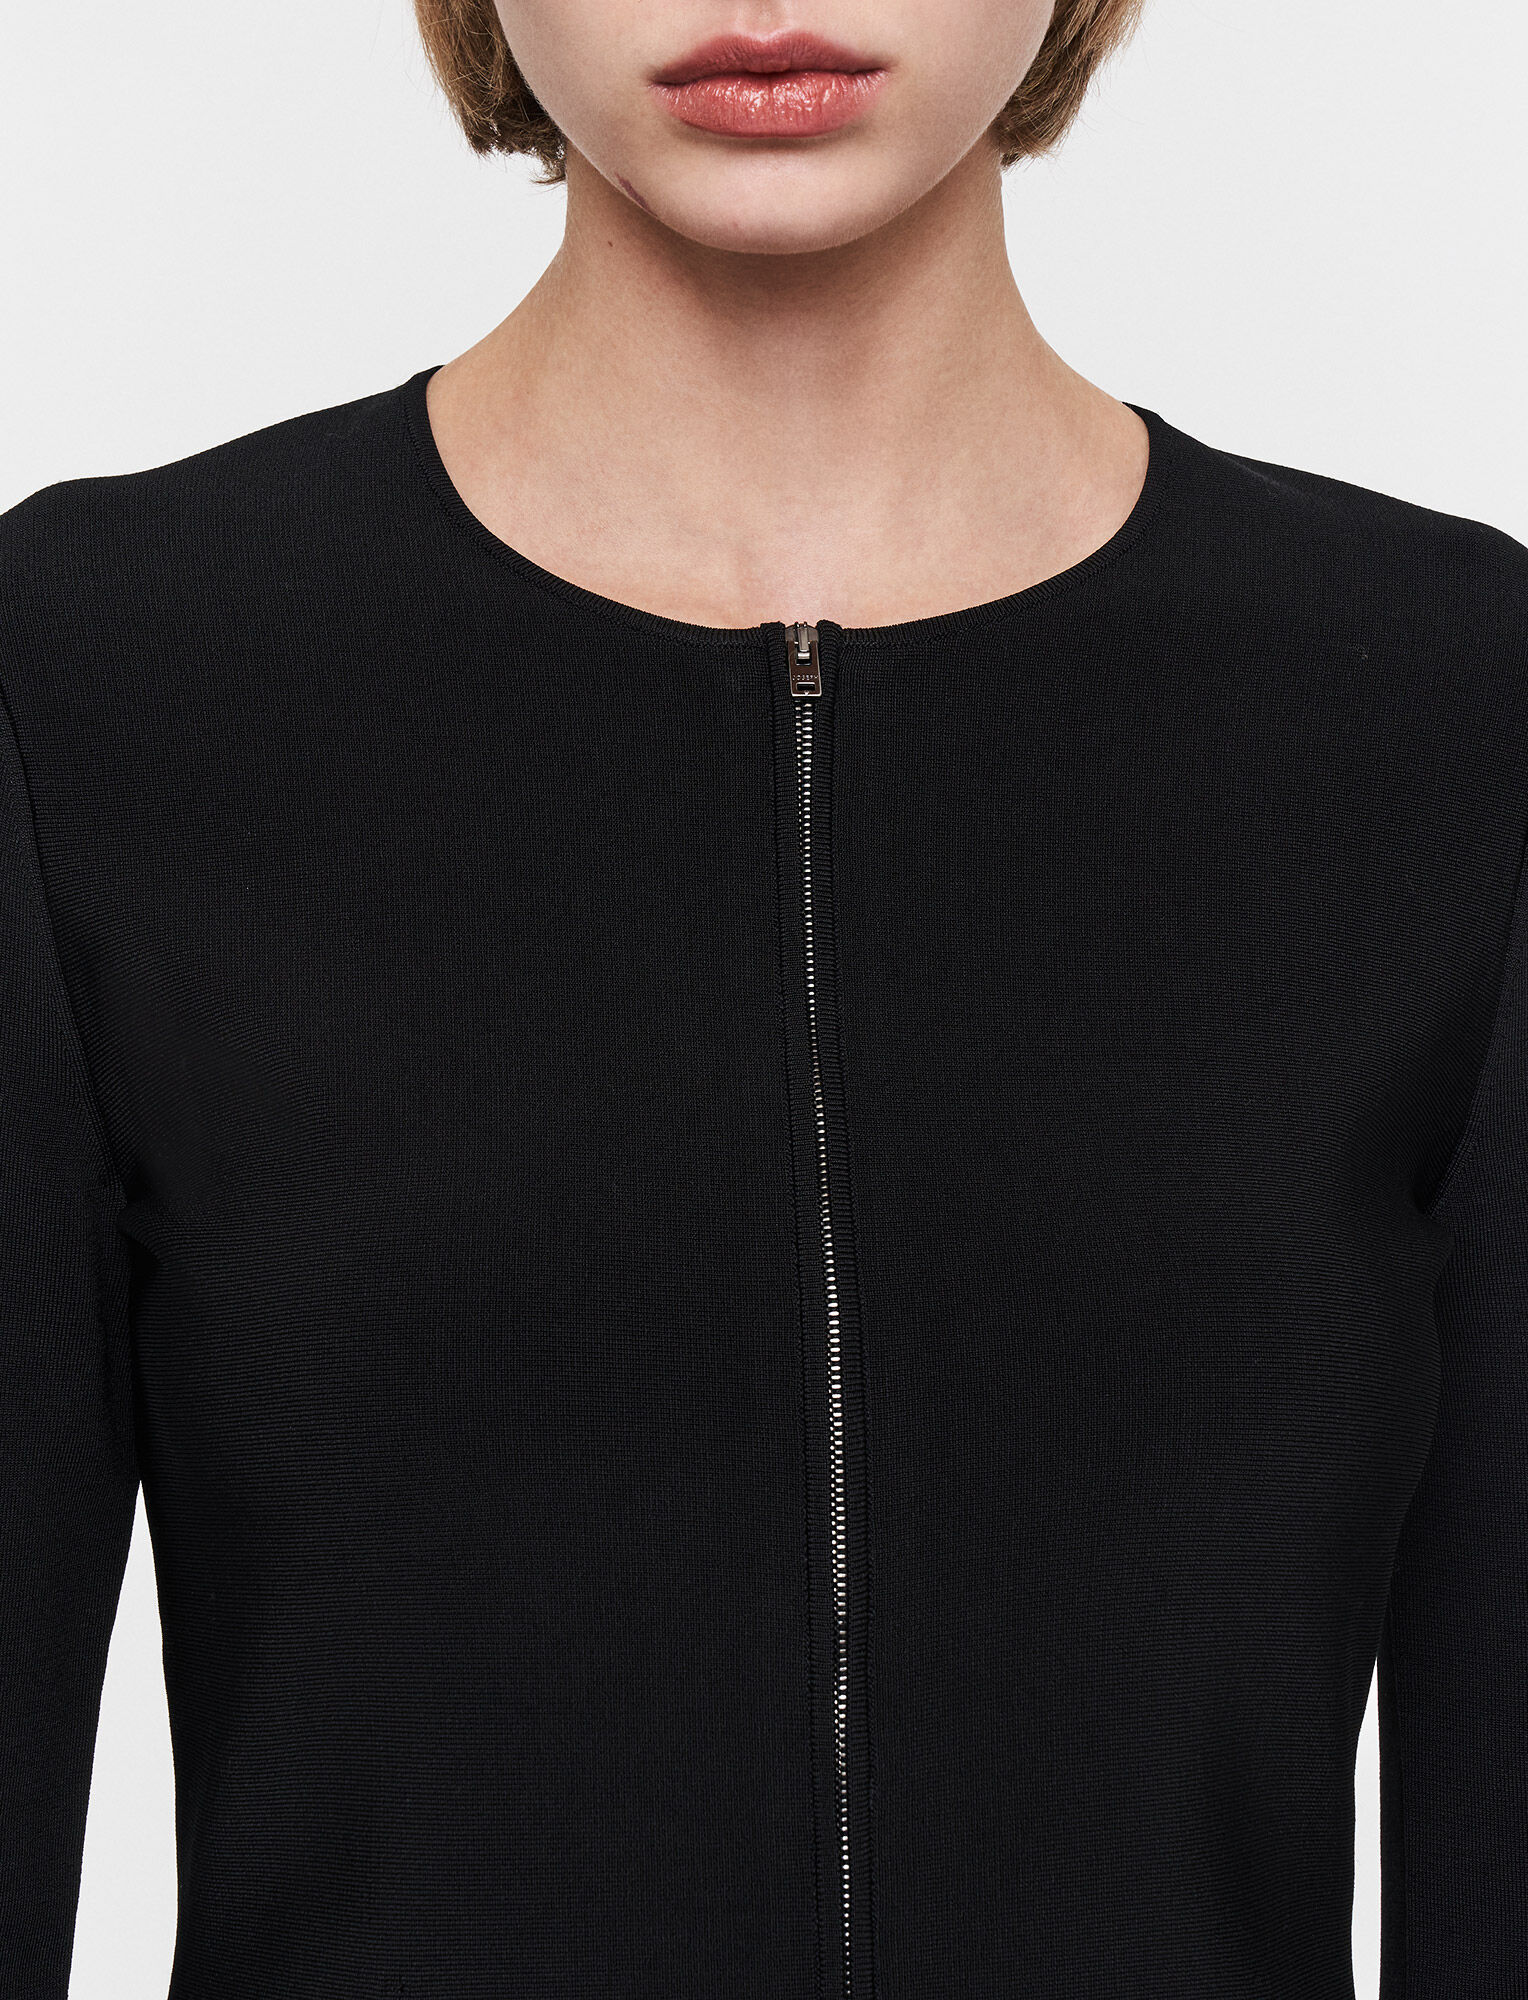 Joseph, Milano Knitted Top, in Black